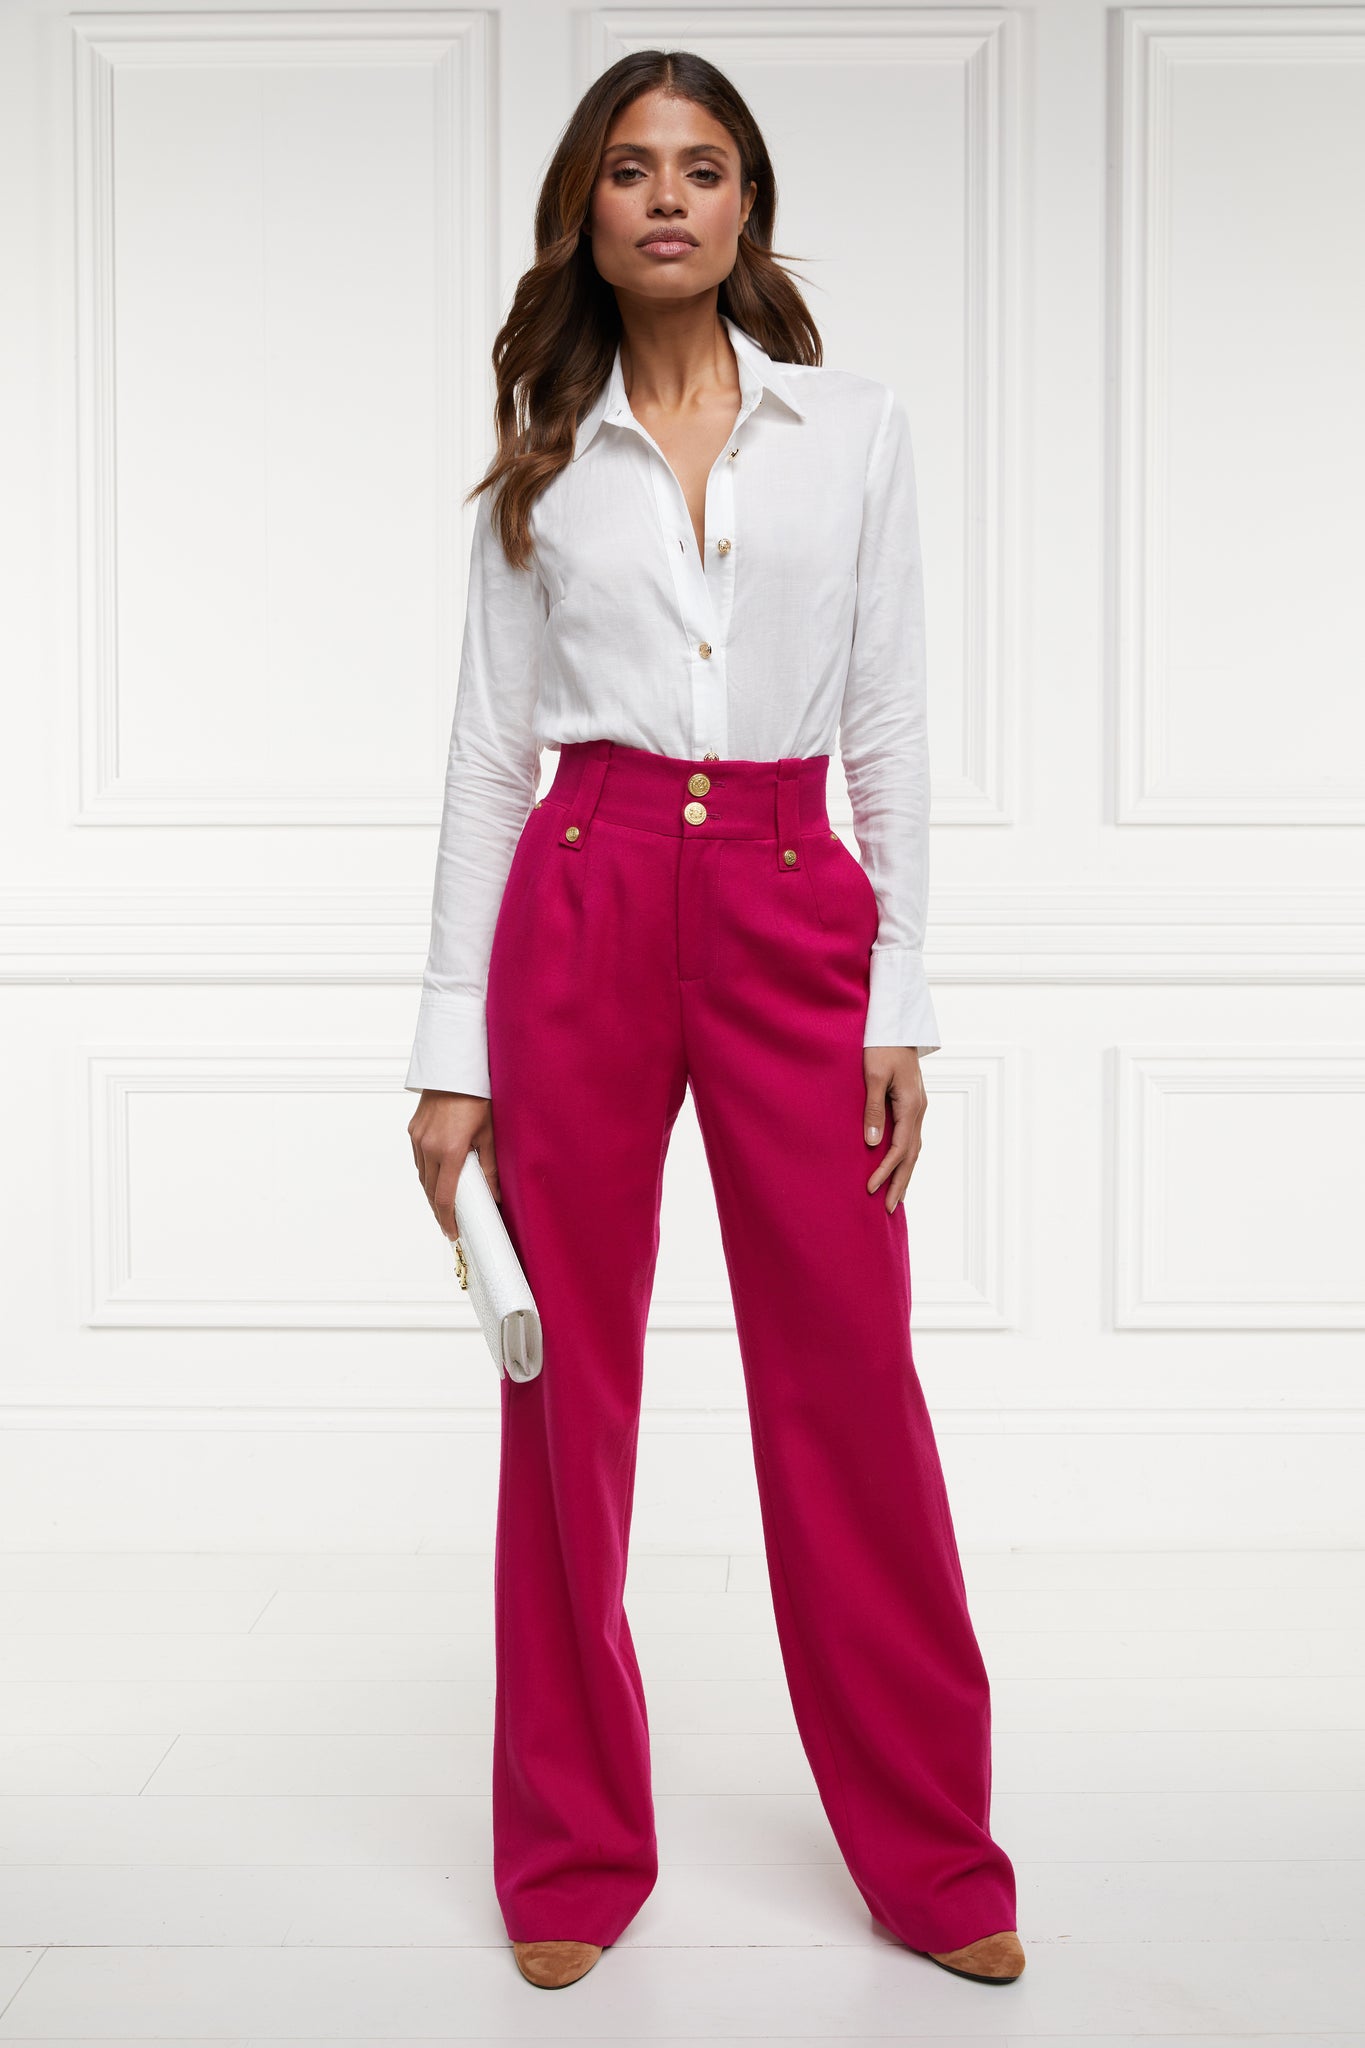 Women's hot pink wool high waisted straight trousers with classic white shirt and white croc clutch bag